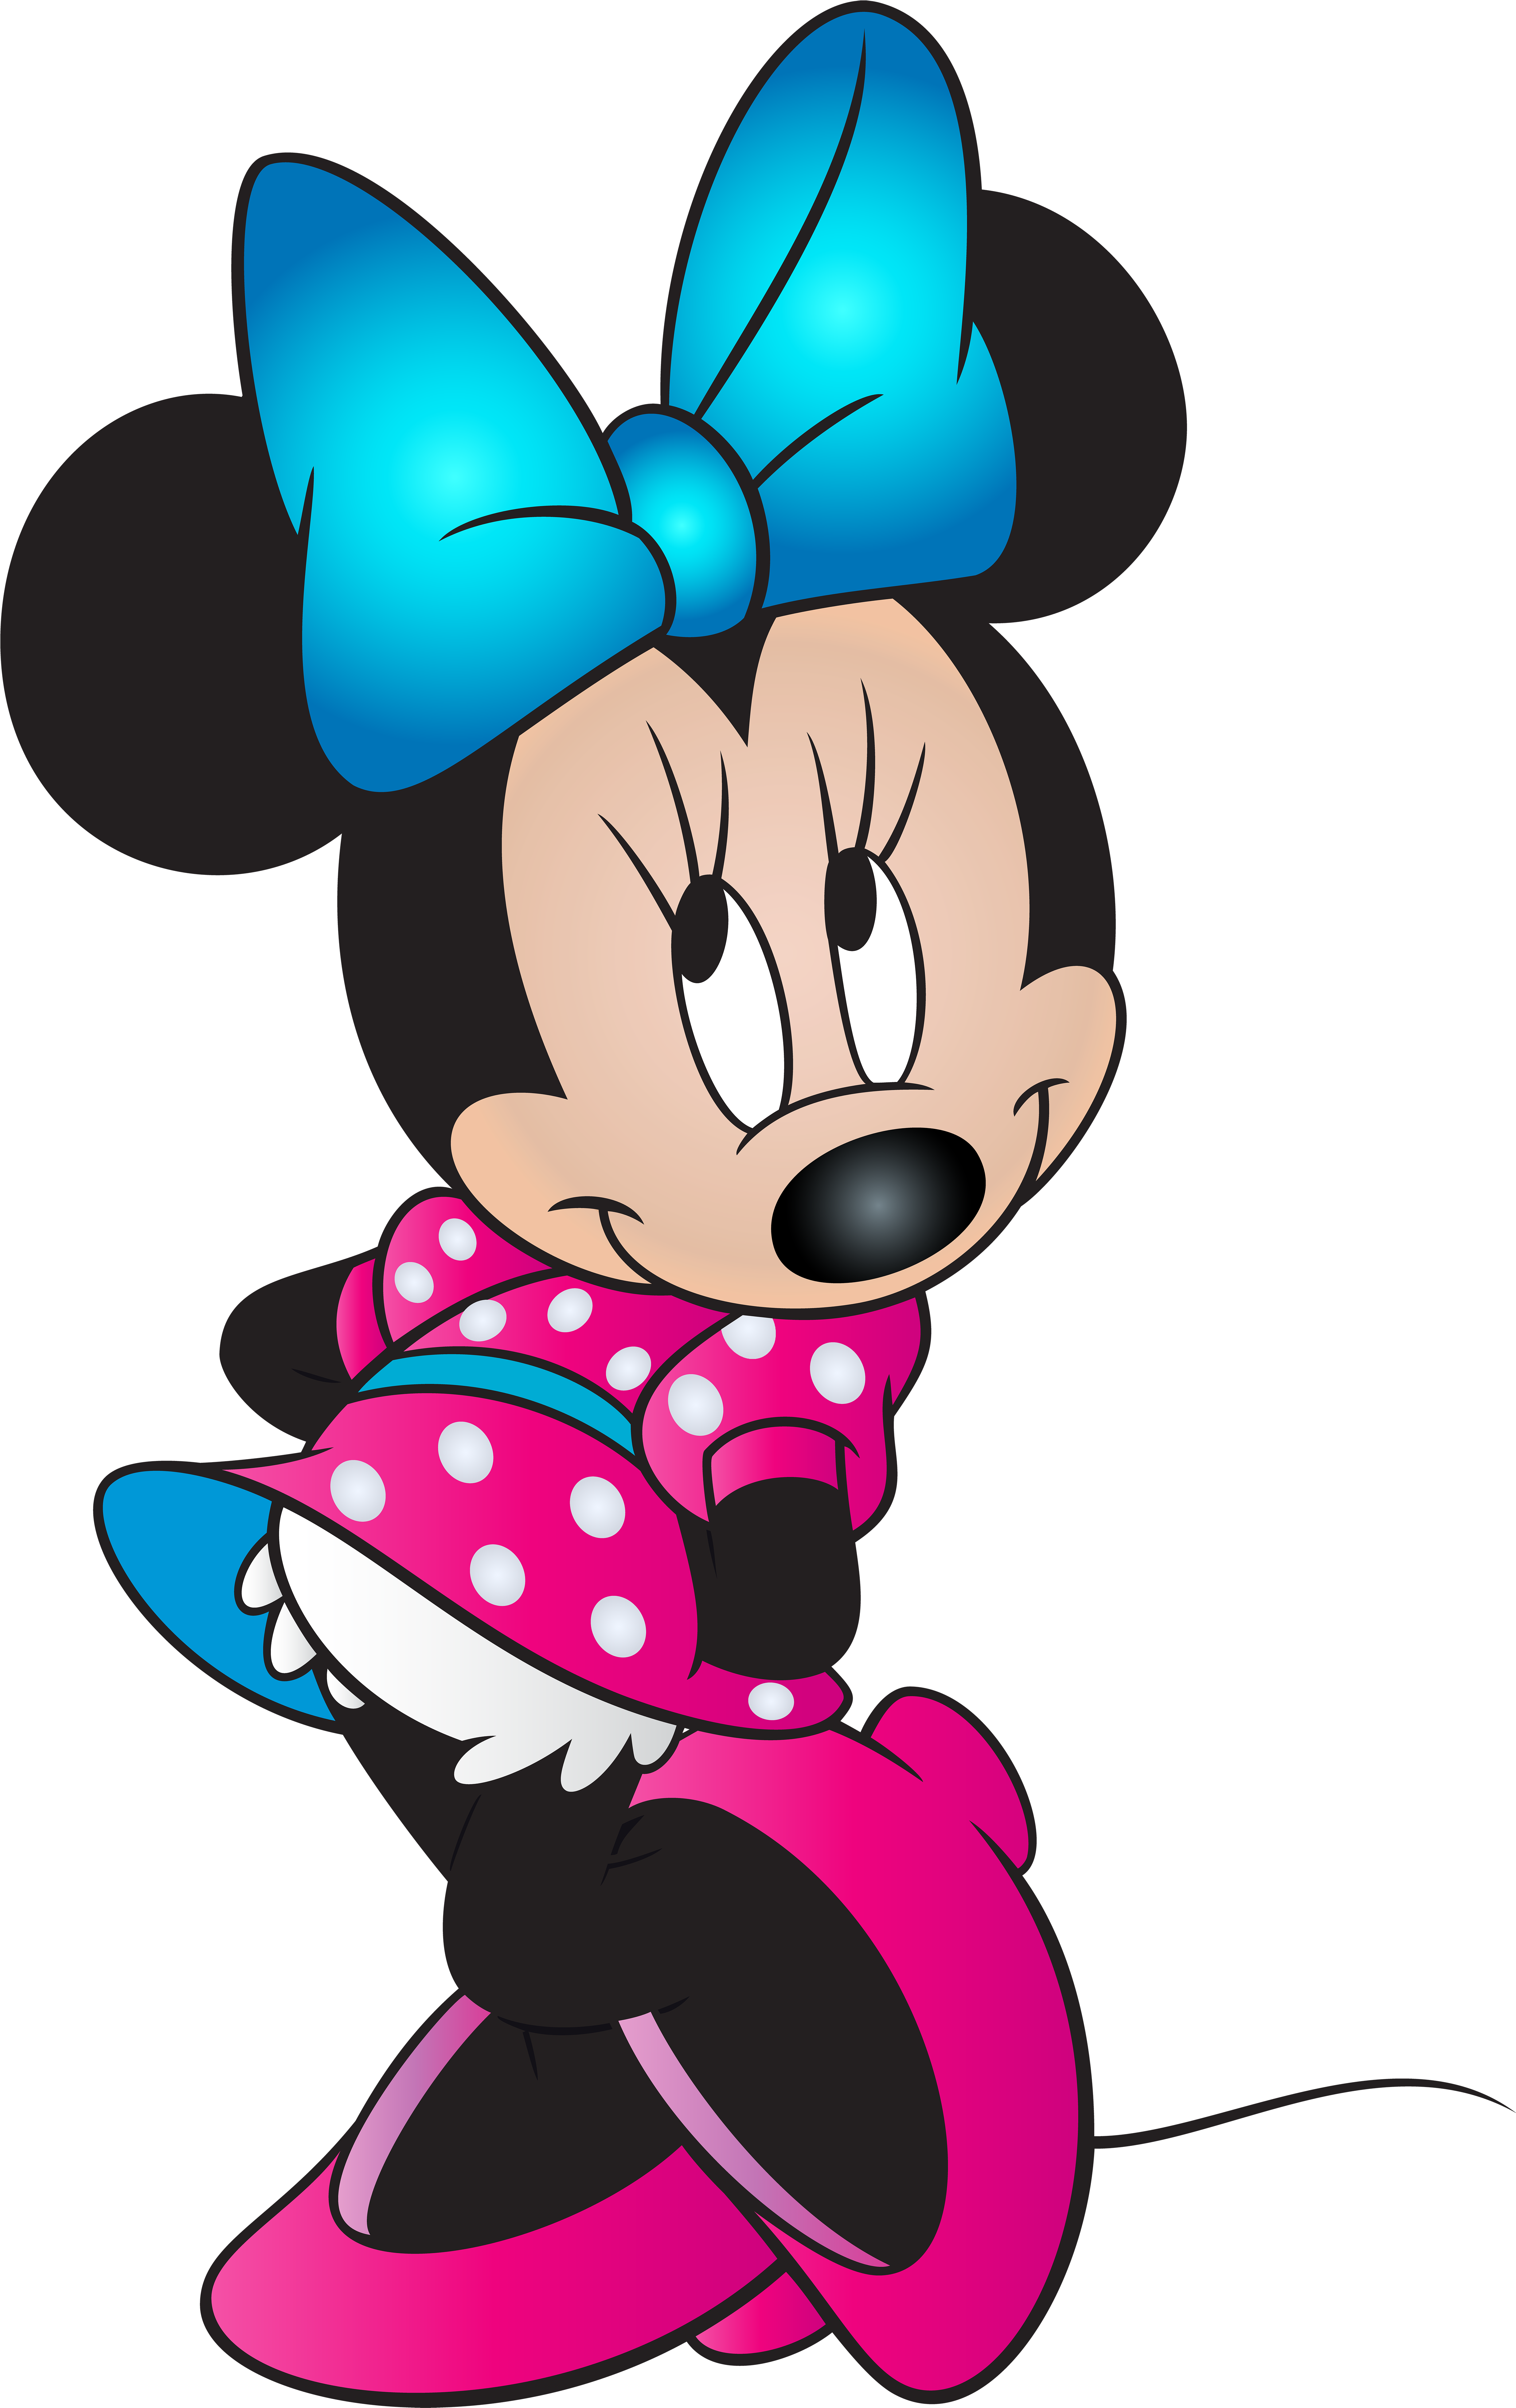 mickey, fashion, wallpaper high quality png images